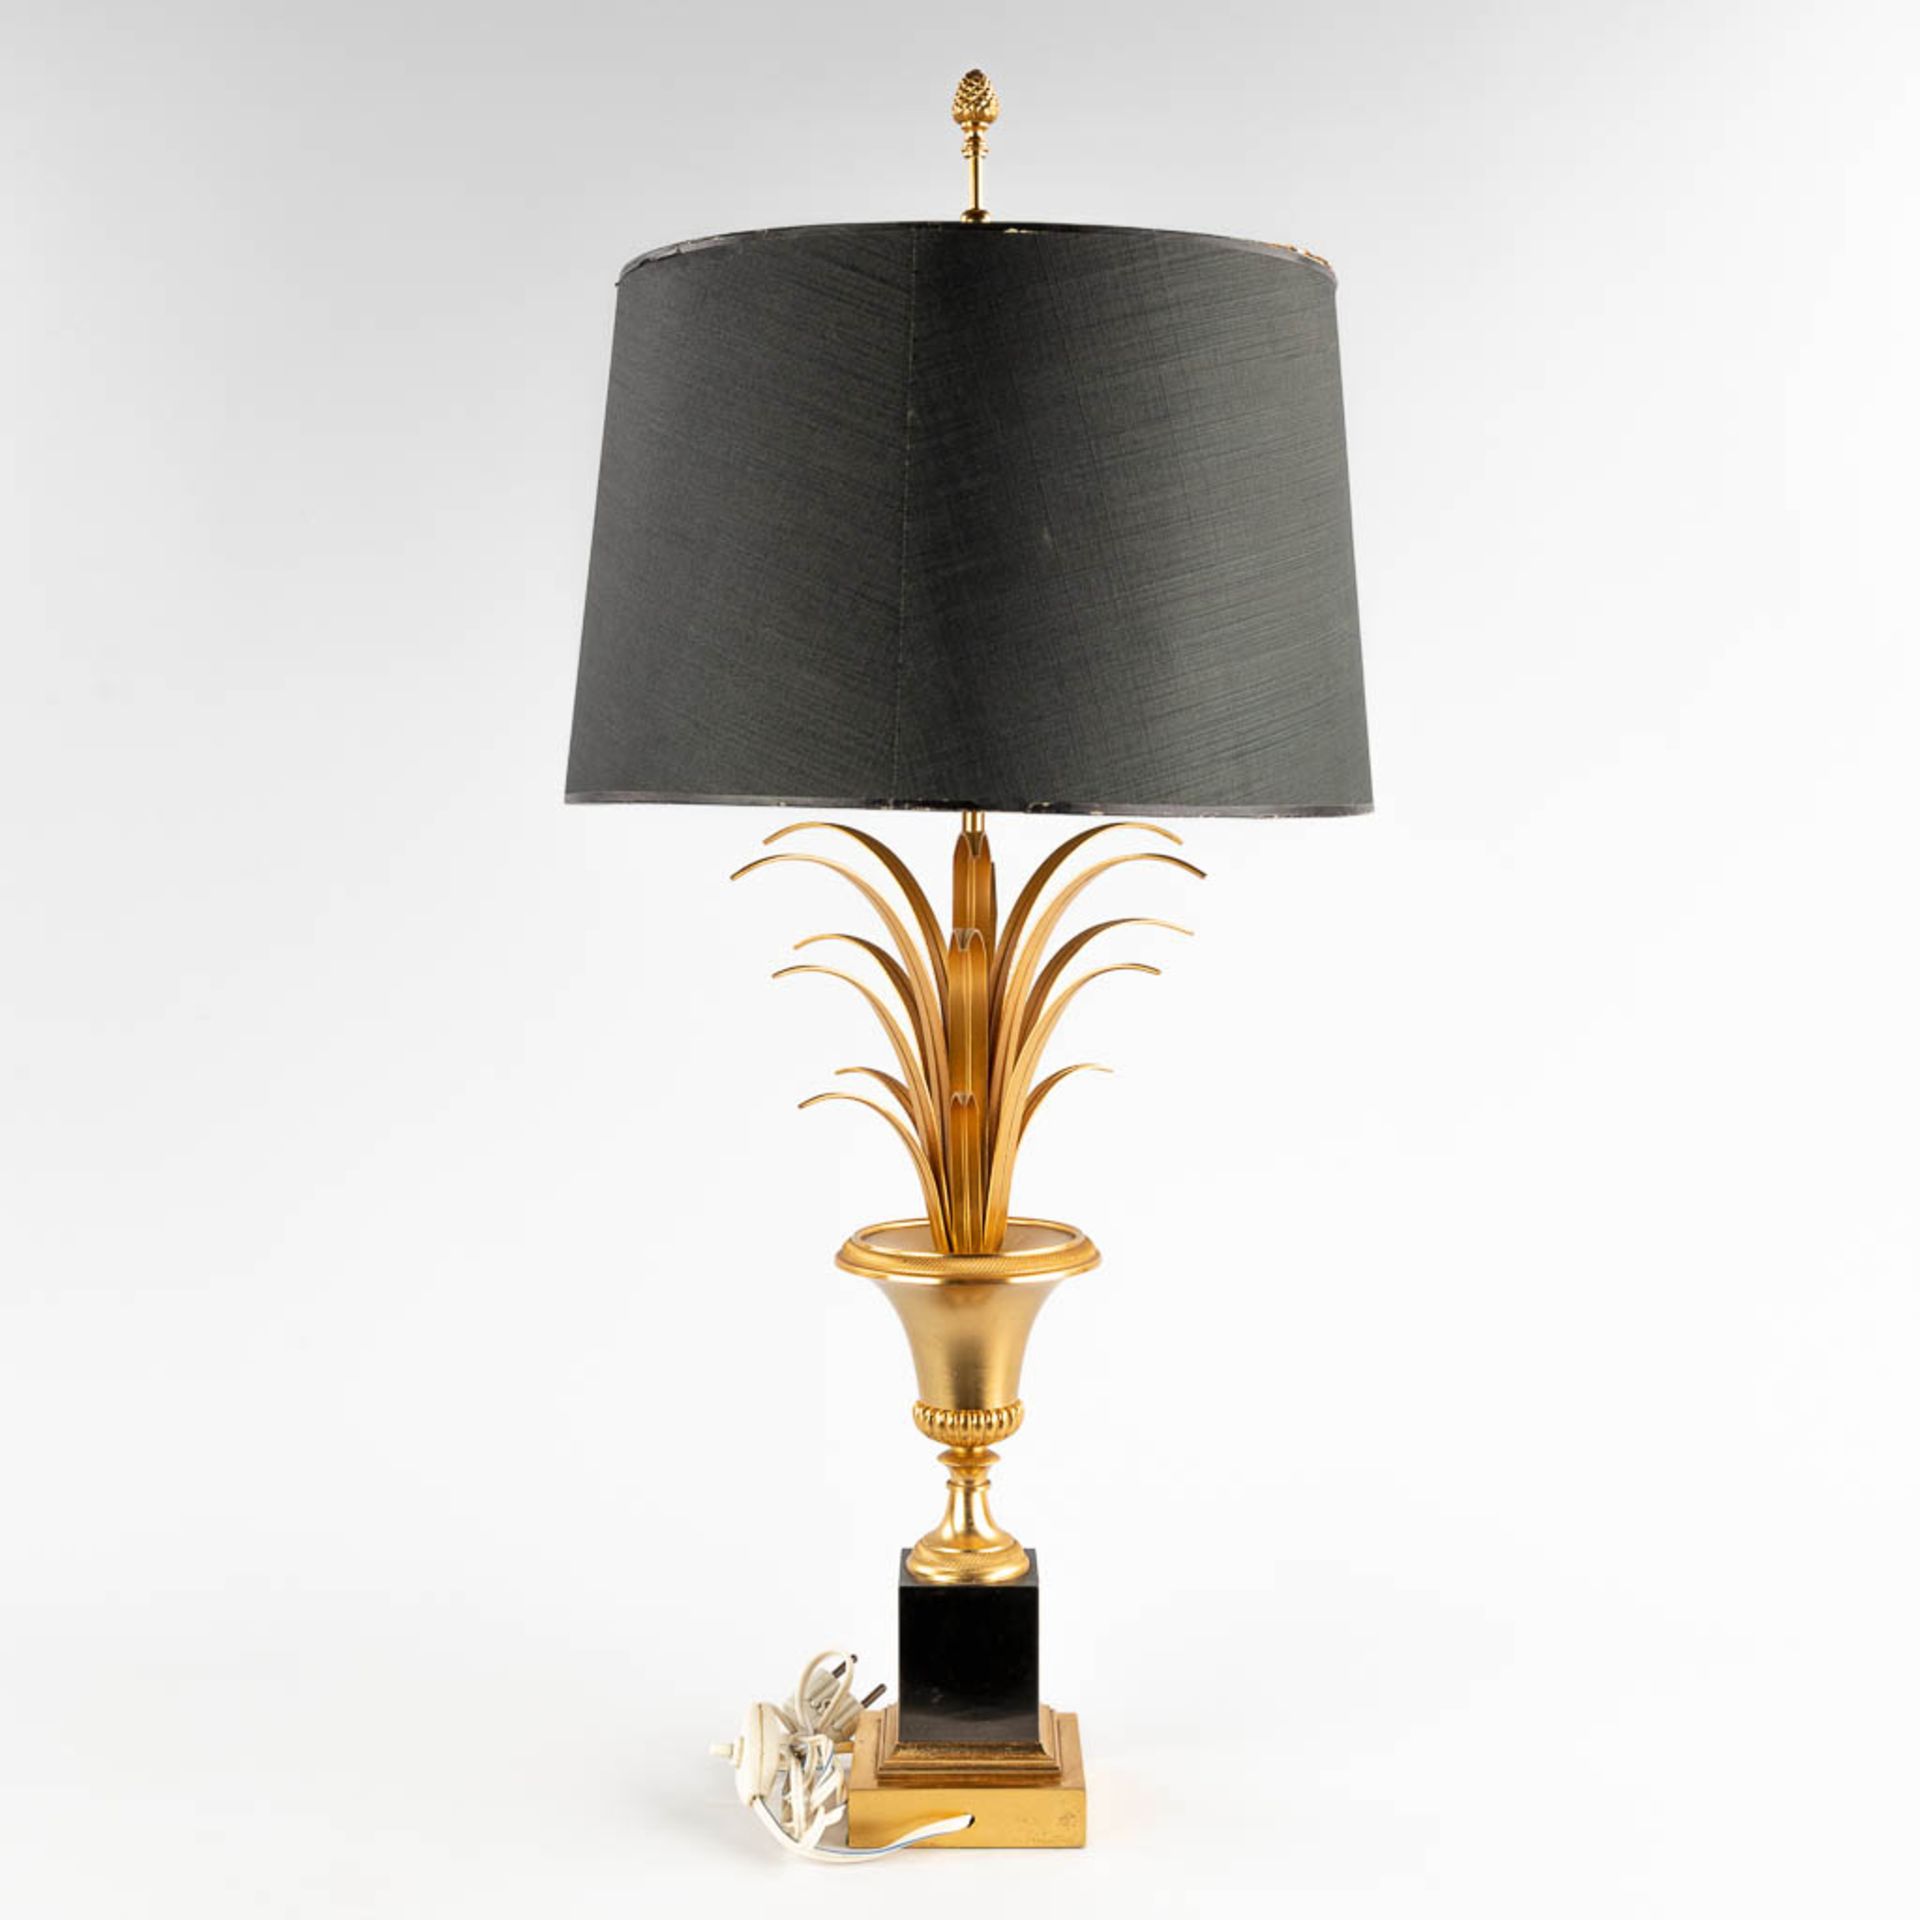 A table lamp, probably made by Boulanger S.A. Hollywood Regency style, 20th C. (H:75 x D:33 cm) - Image 5 of 9